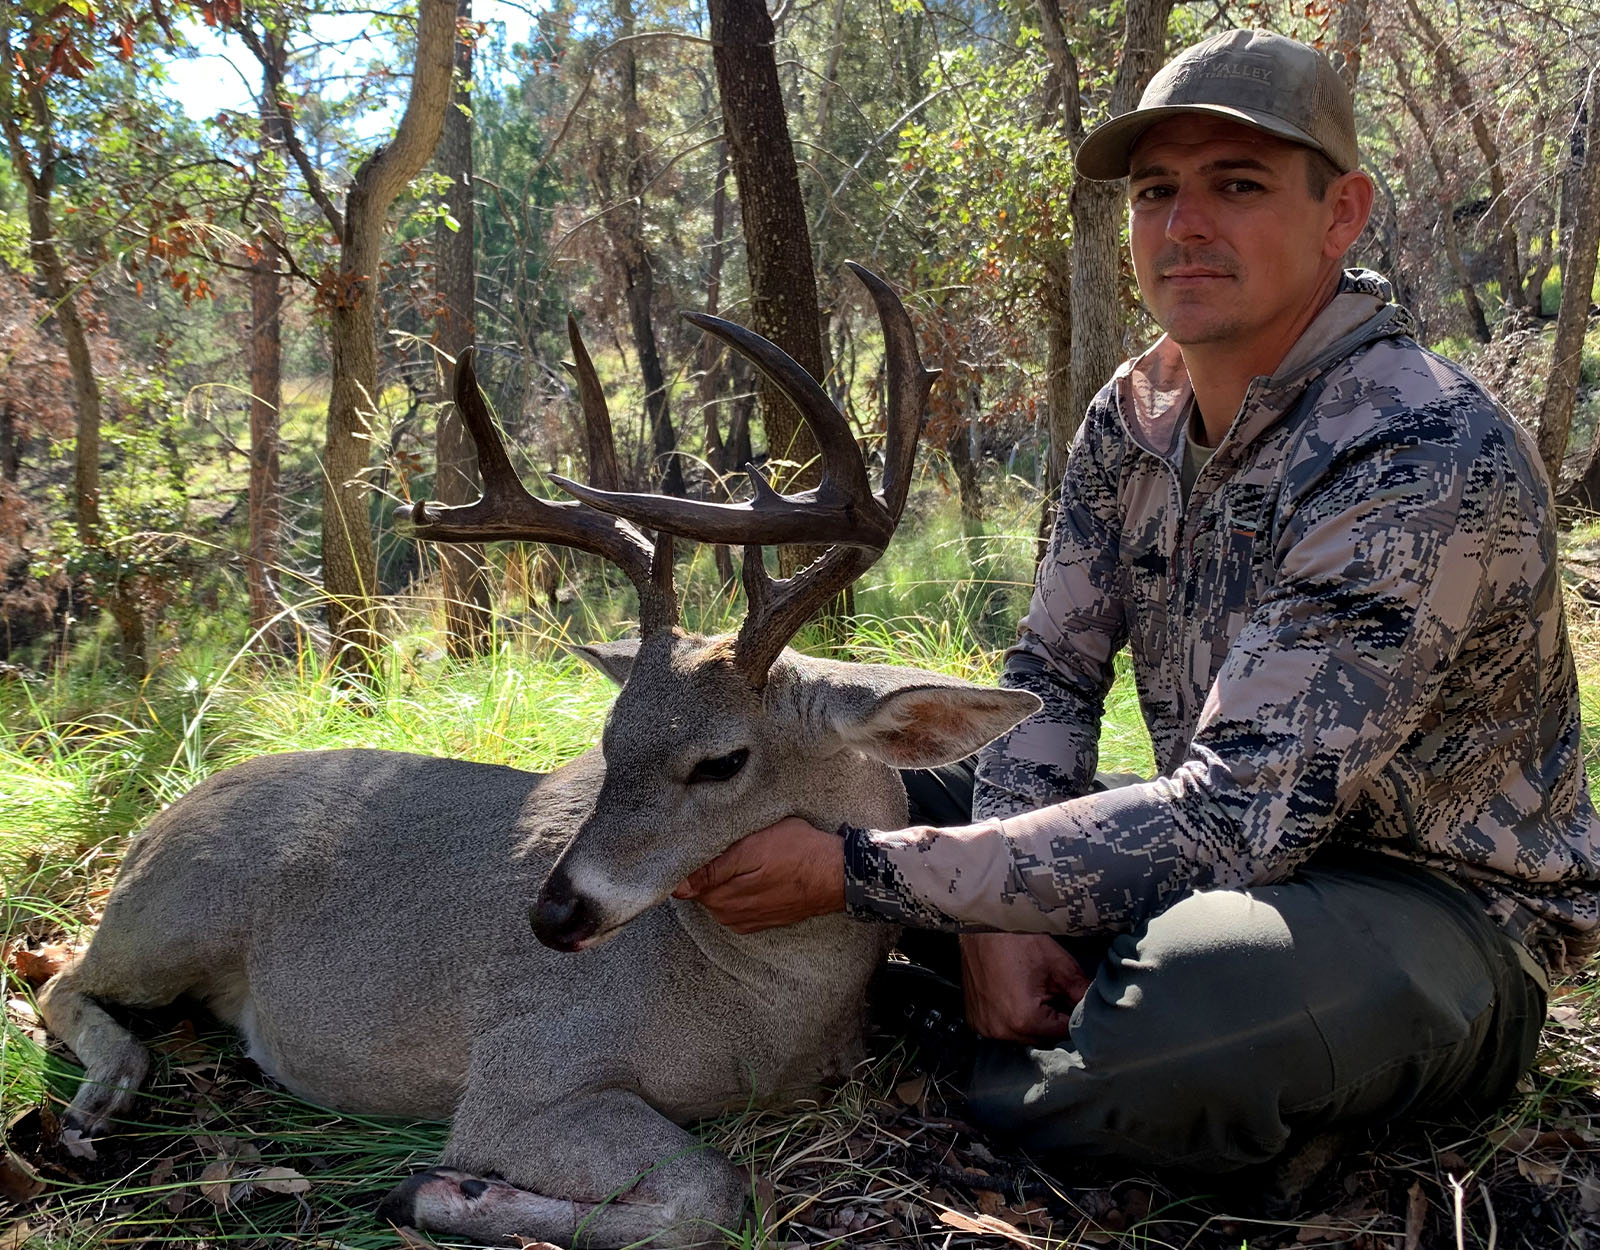 A male hunter in camo with the Coues deer he harvested in a forested area.